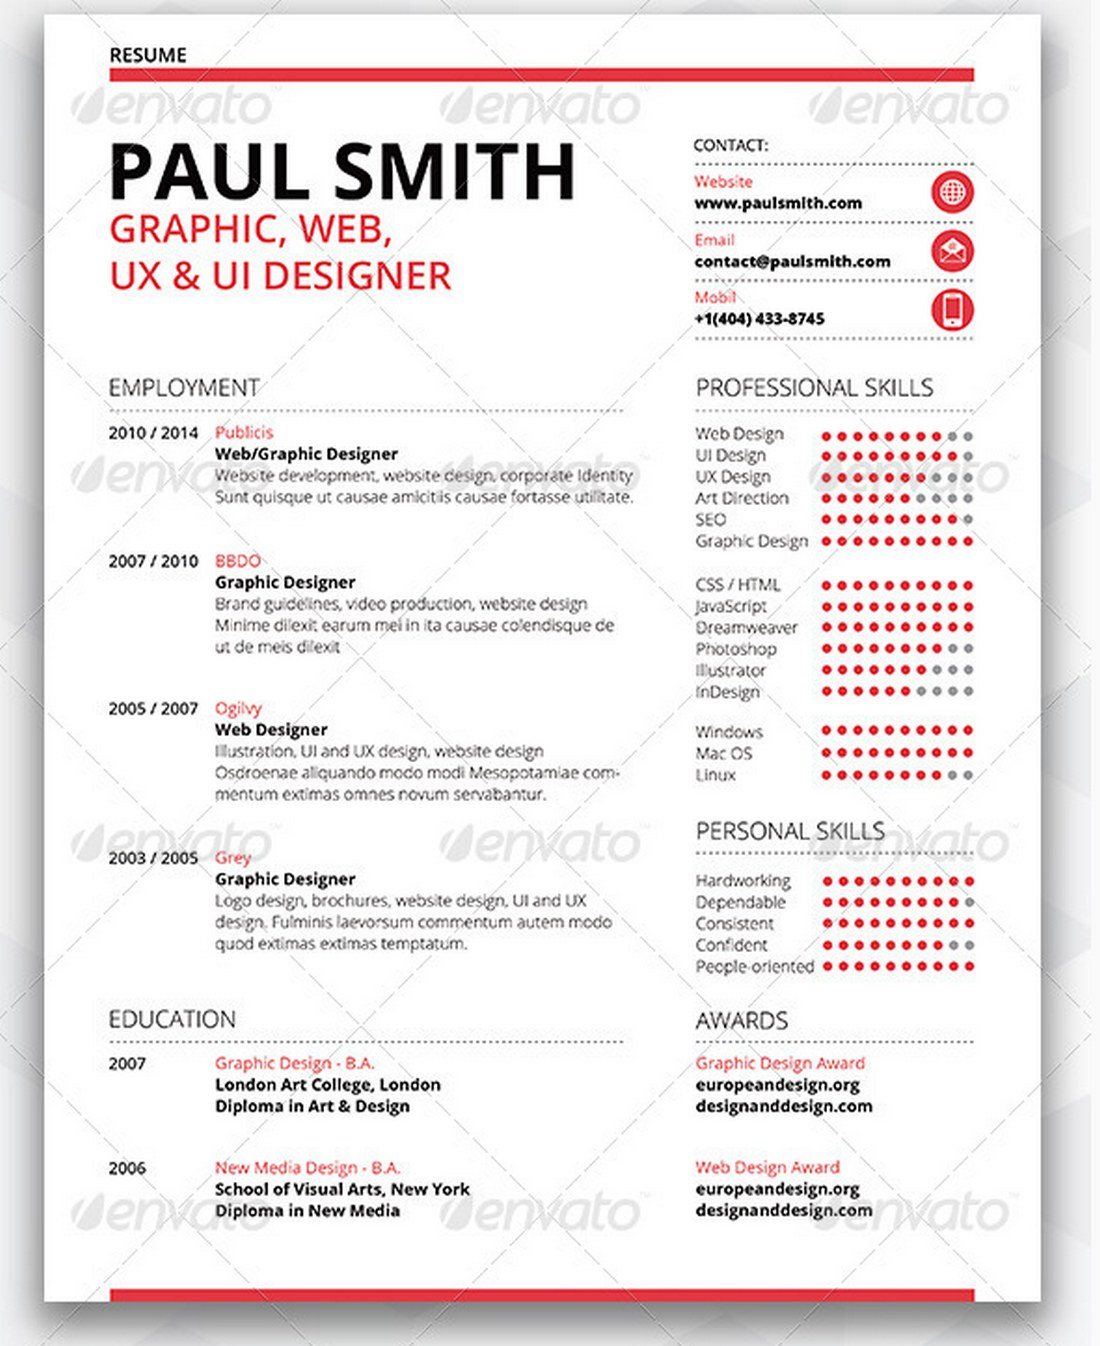 creative-resume-1 20+ Best Pages Resume & CV Templates design tips